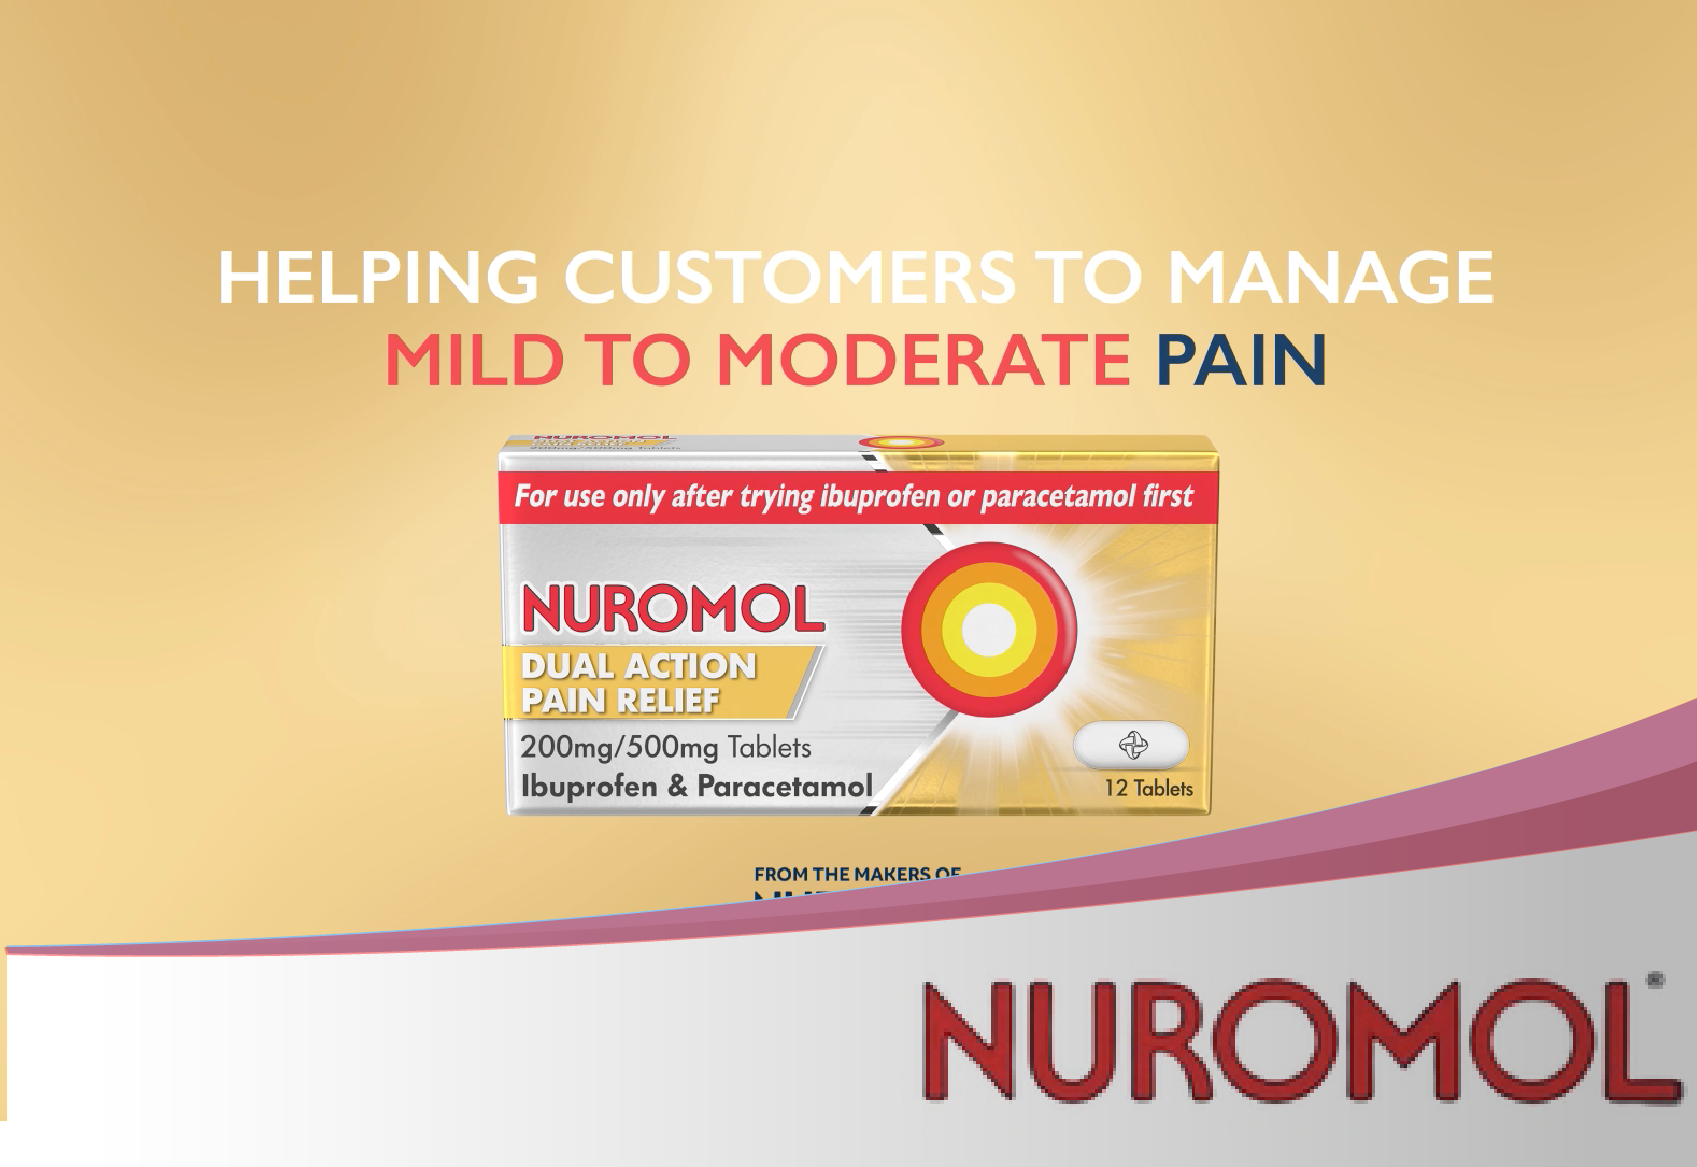 Effectively managing mild to moderate pain